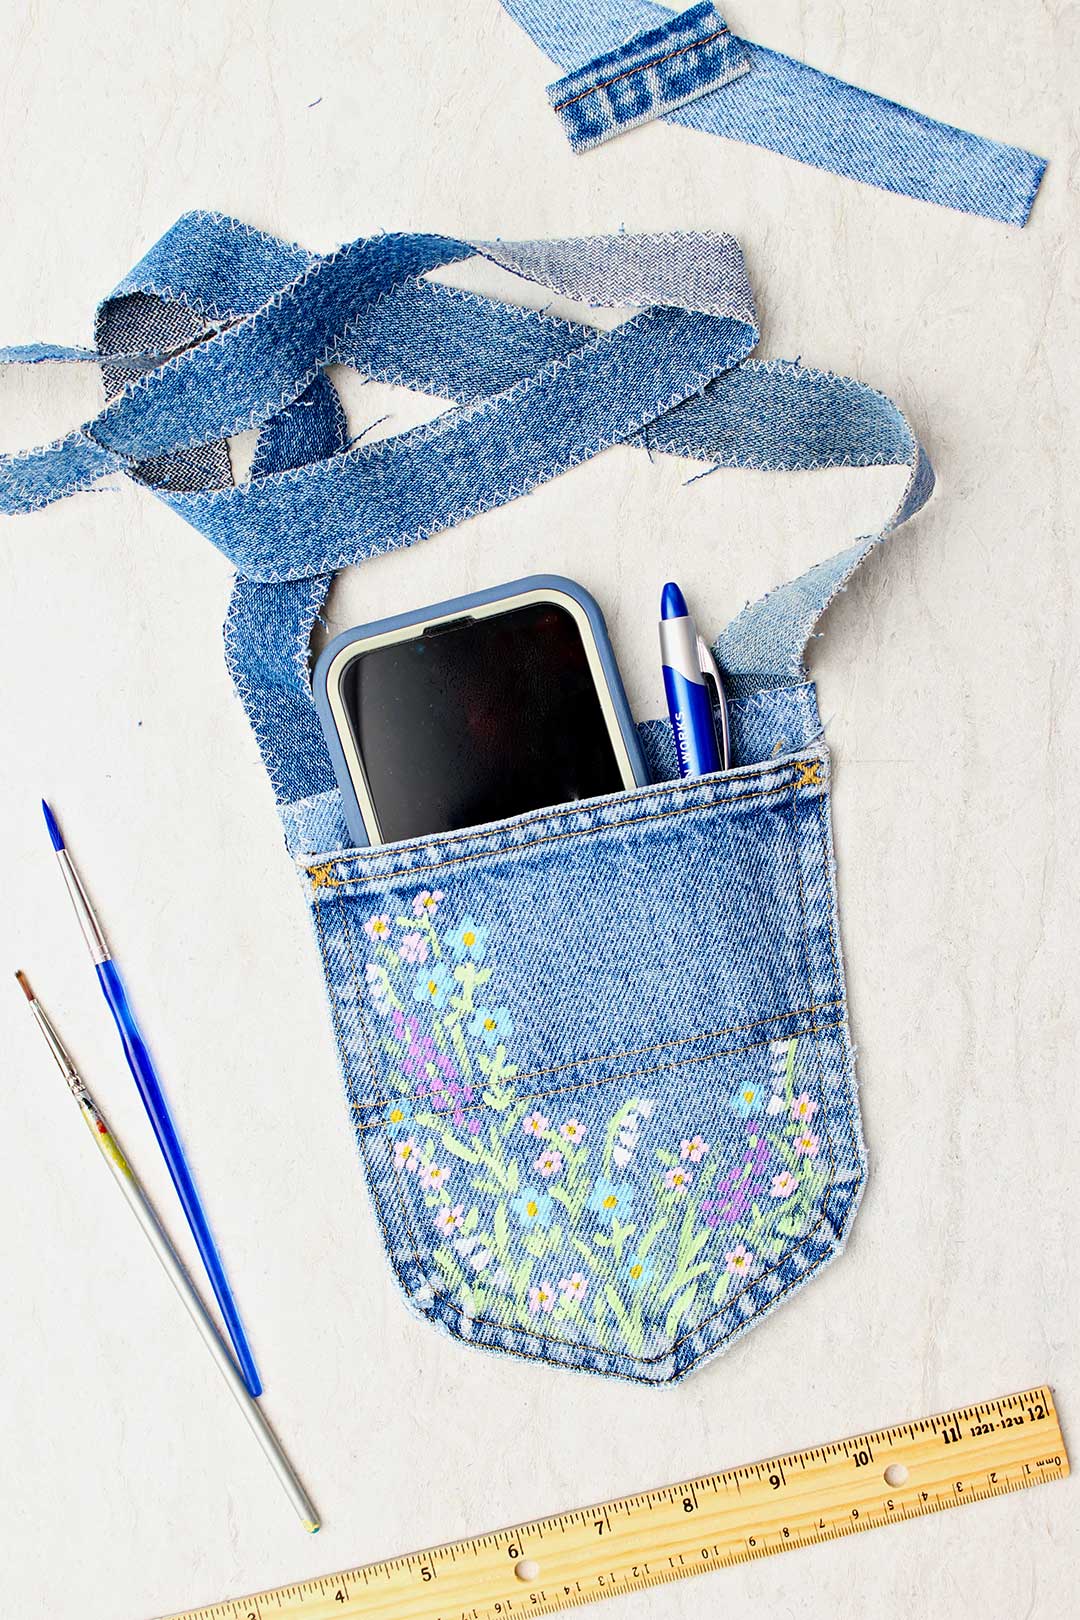 DIY Pocket Purse Using Old Jeans - How To Make No Sew Mini Bag From Denim -  Old Jeans Crafts Ideas - YouTube